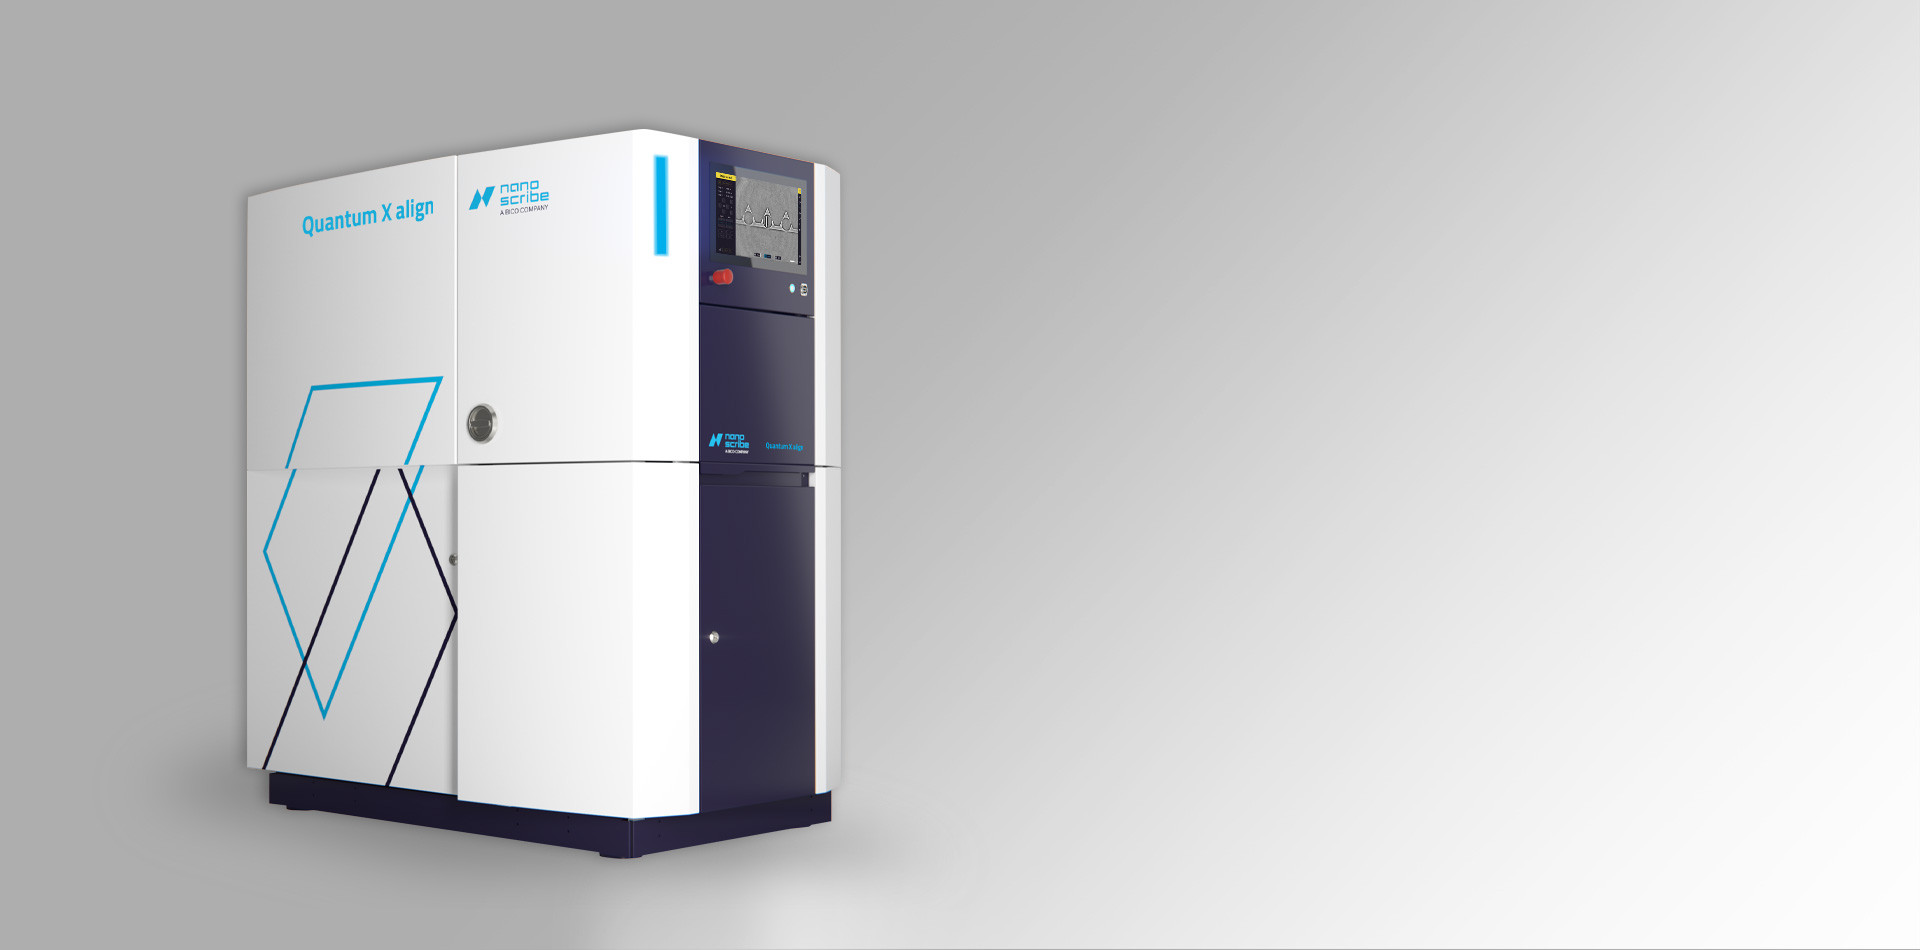 Our new 3D printing system Quantum X align